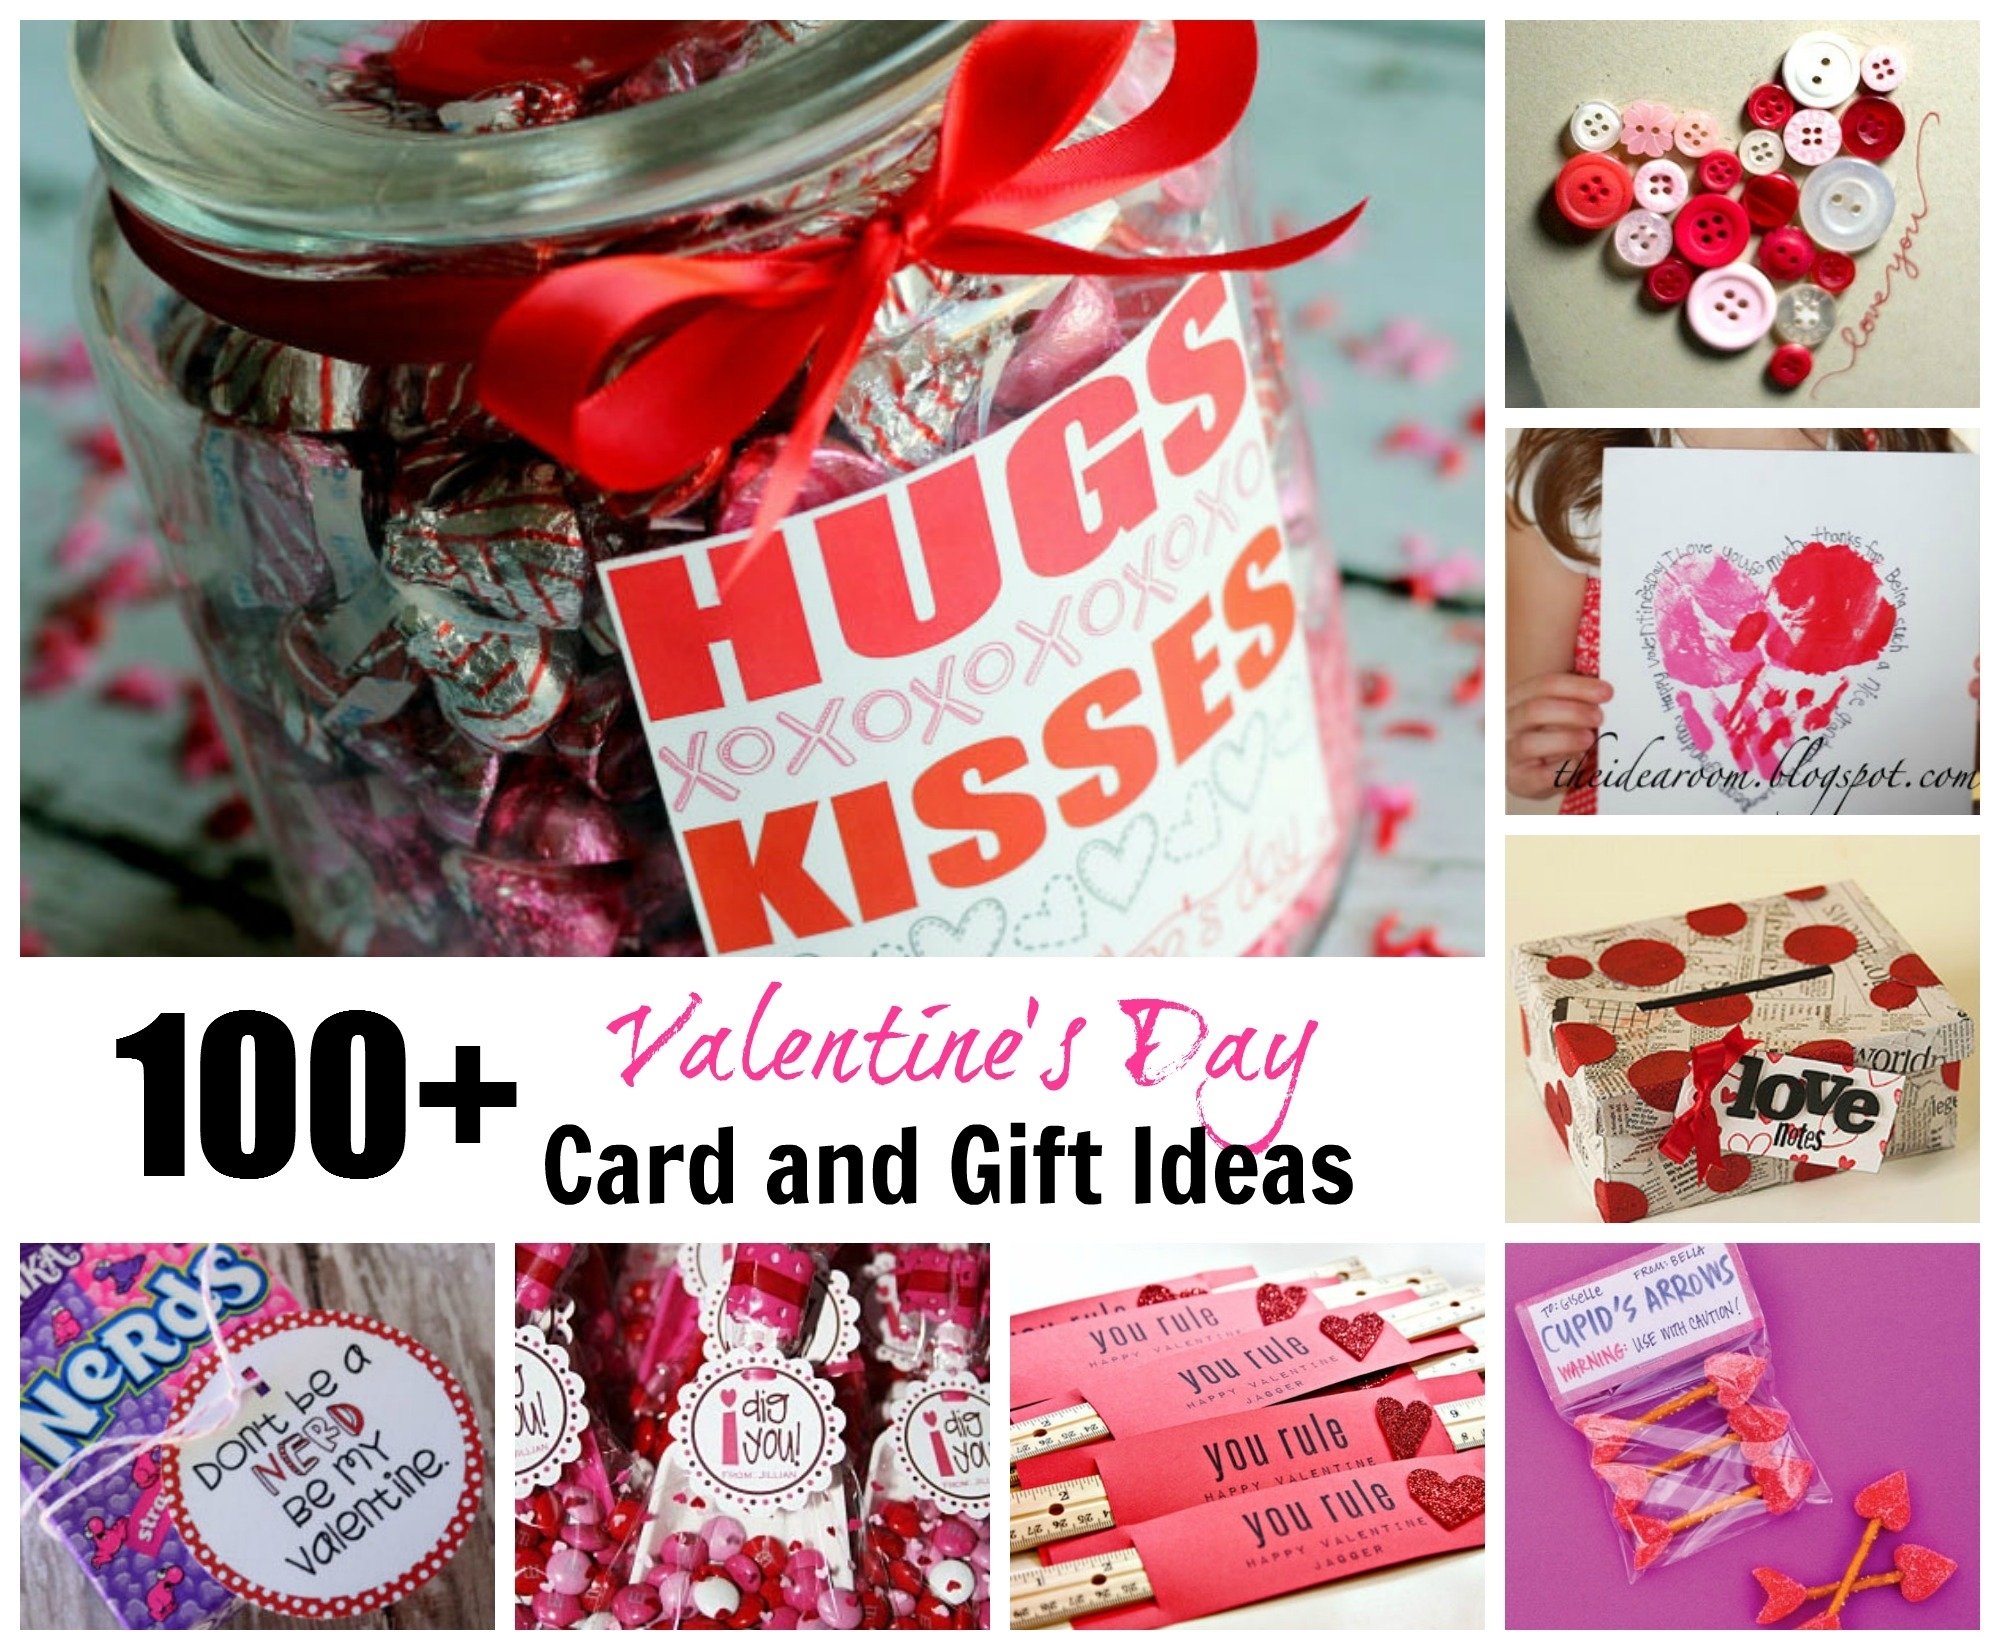 10 Lovable Homemade Valentines Ideas For Him homemade valentines day ideas for boyfriend startupcorner co 2 2023